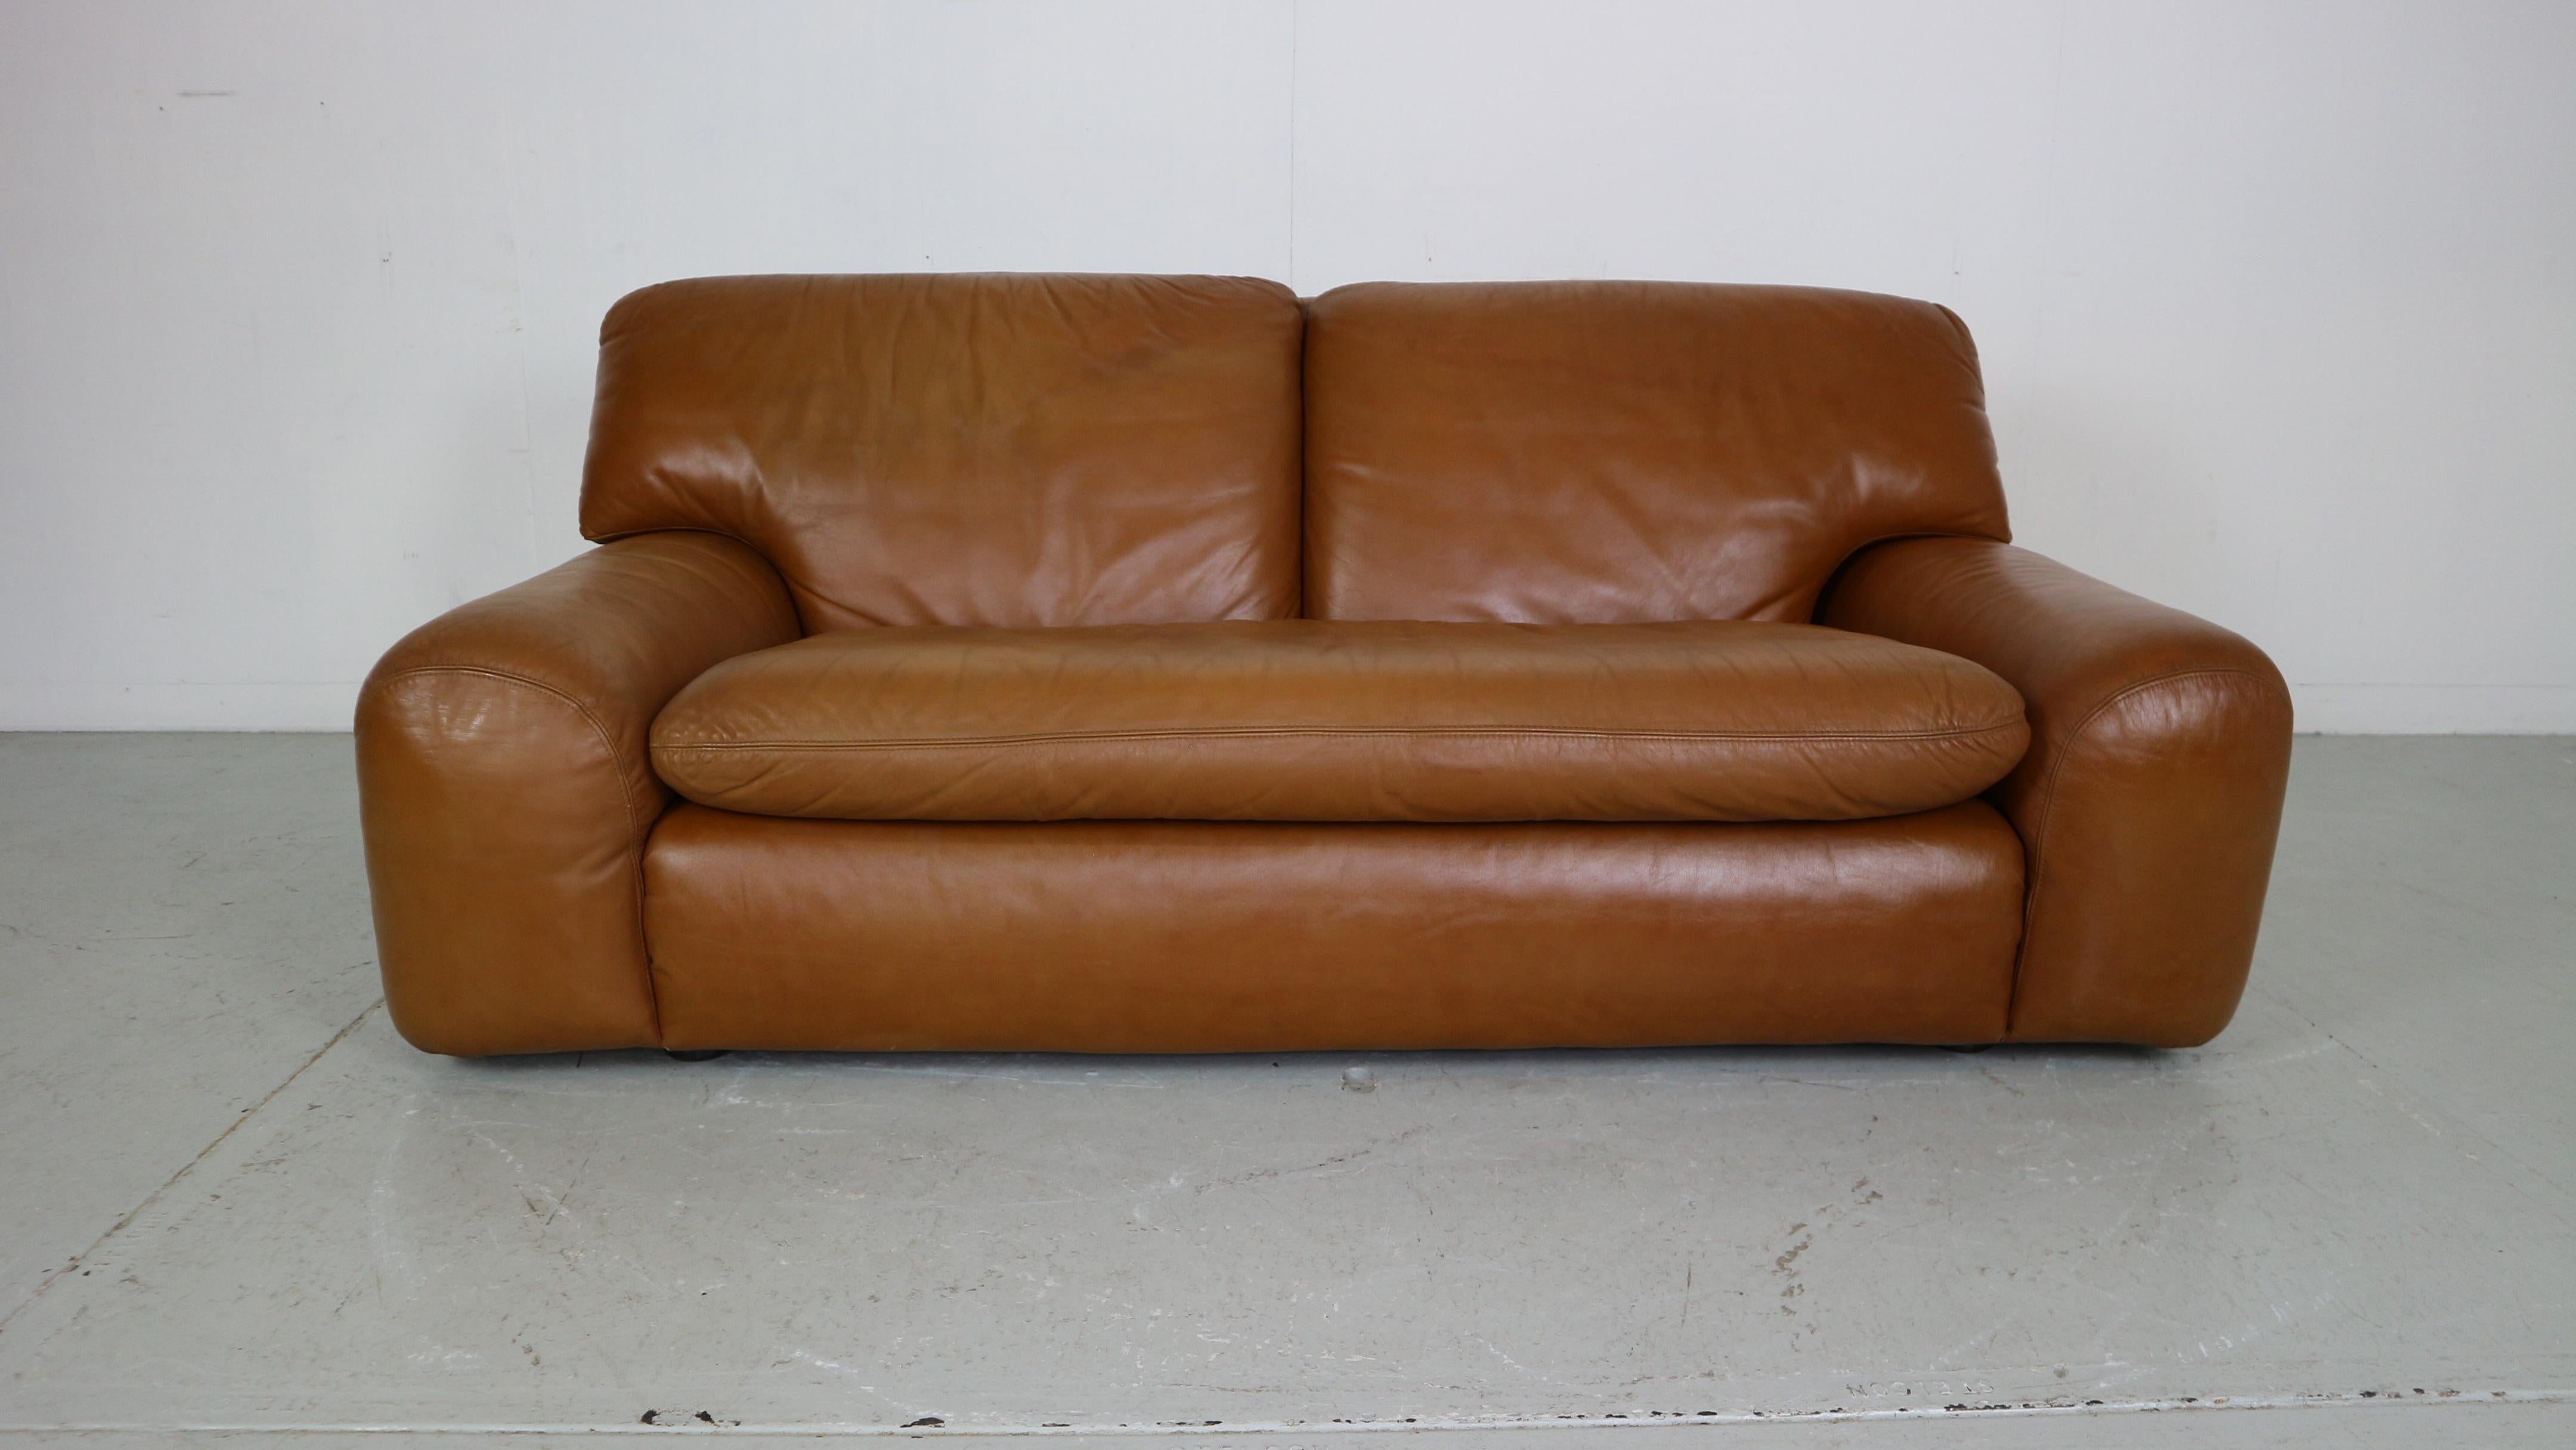 Mid- Century modern period stunning and rare Bengodi 2-seat sofa.  
Designed by Cini Boeri for Aflex Italy, 1970's circa.

Original cognac leather with a stunning patina! 
Very good vintage condition - no damage.

Very comfortable and high quality